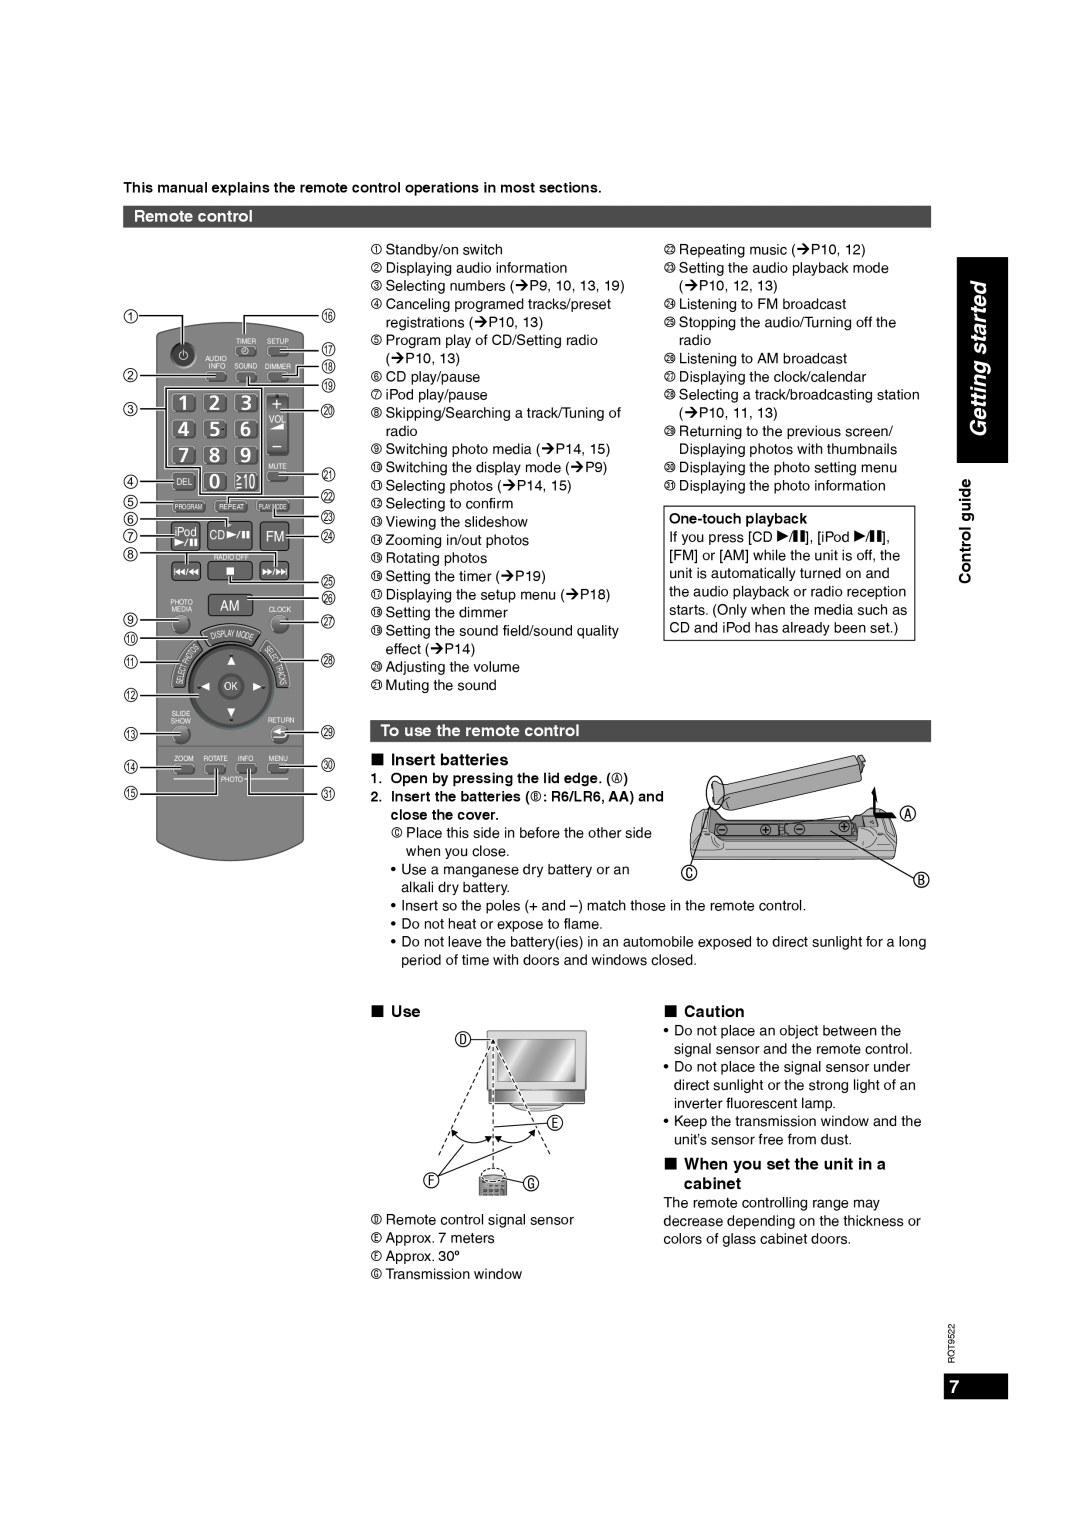 Panasonic MW-10 D E Fg, Remote control, Control guide, To use the remote control, „Insert batteries, „Use, „Caution 